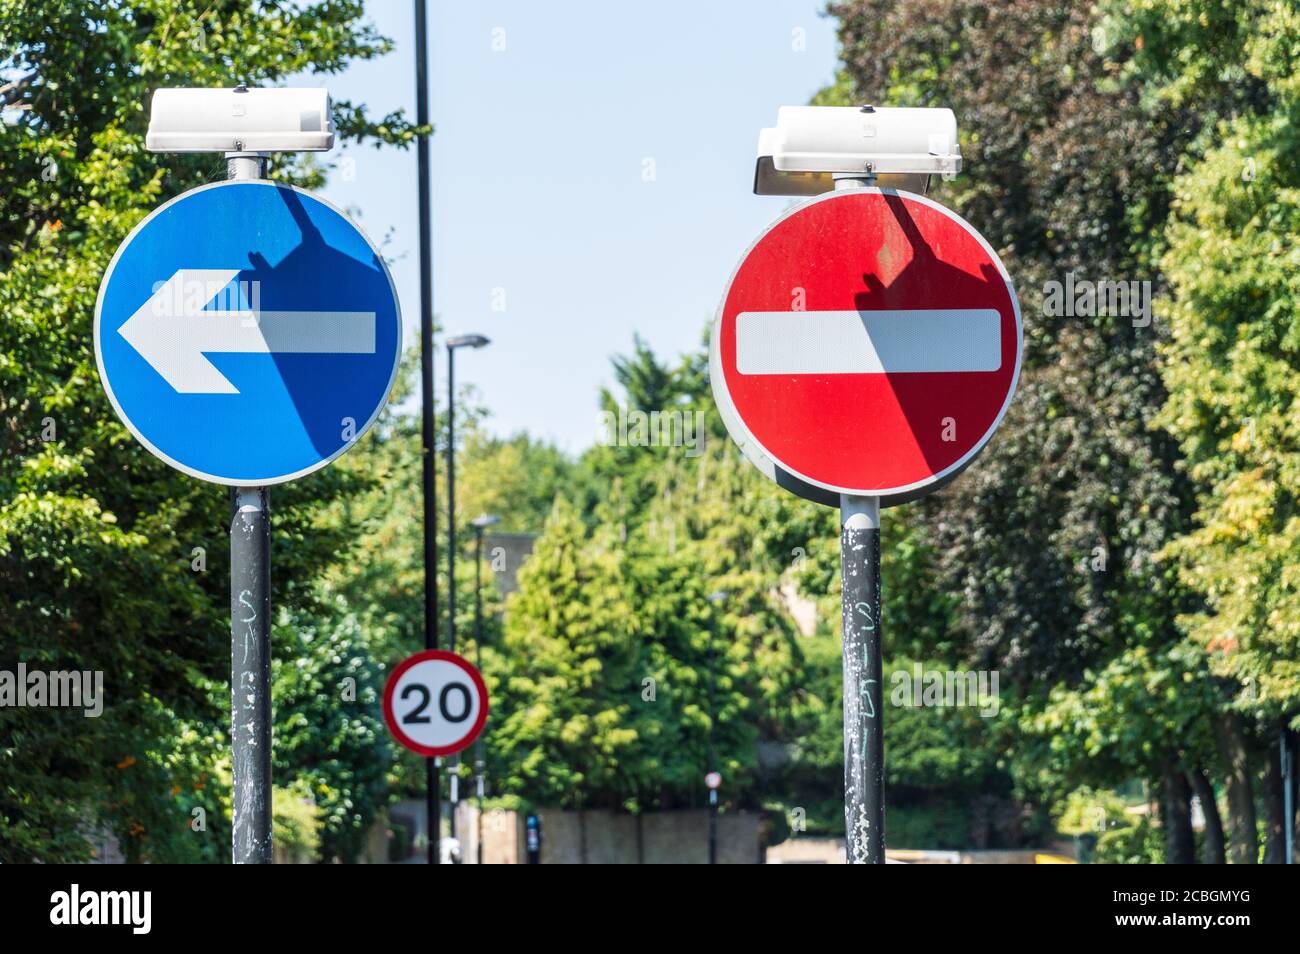 No entry and One way turn road sign Stock Photo